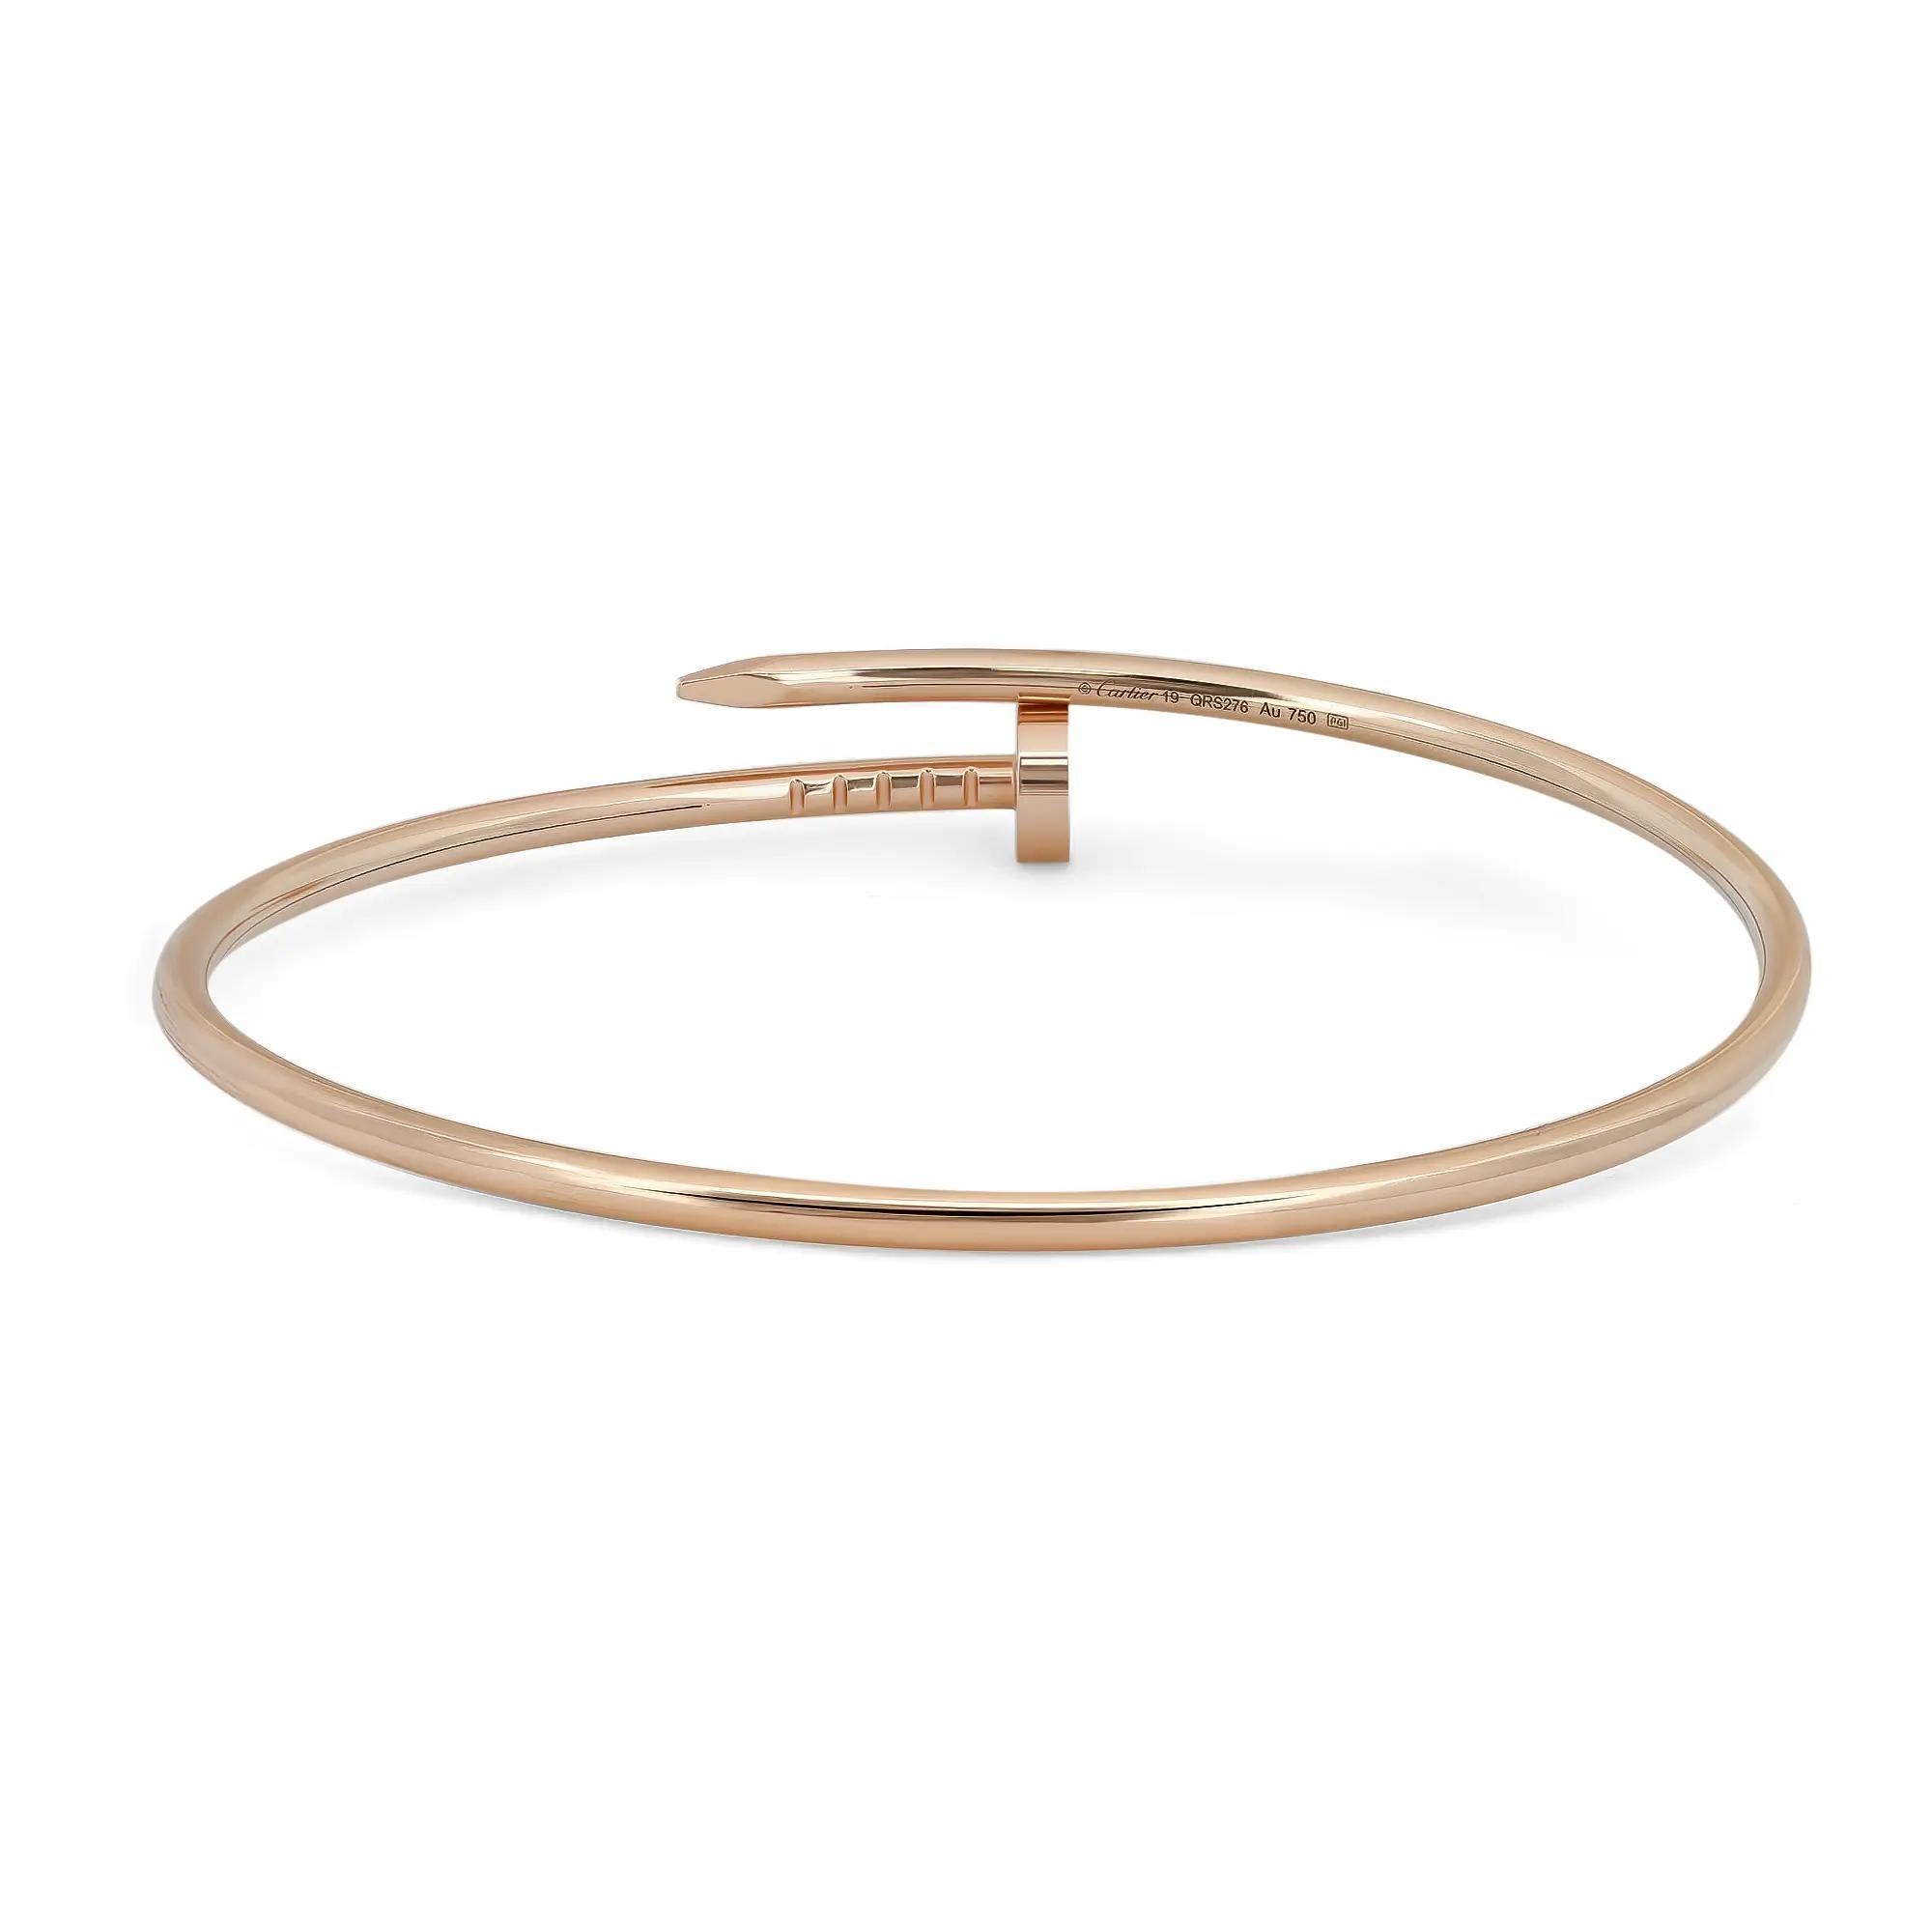 Cartier Juste Un Clou Bracelet Small Model 18K Rose Gold Size 19 In Excellent Condition For Sale In New York, NY